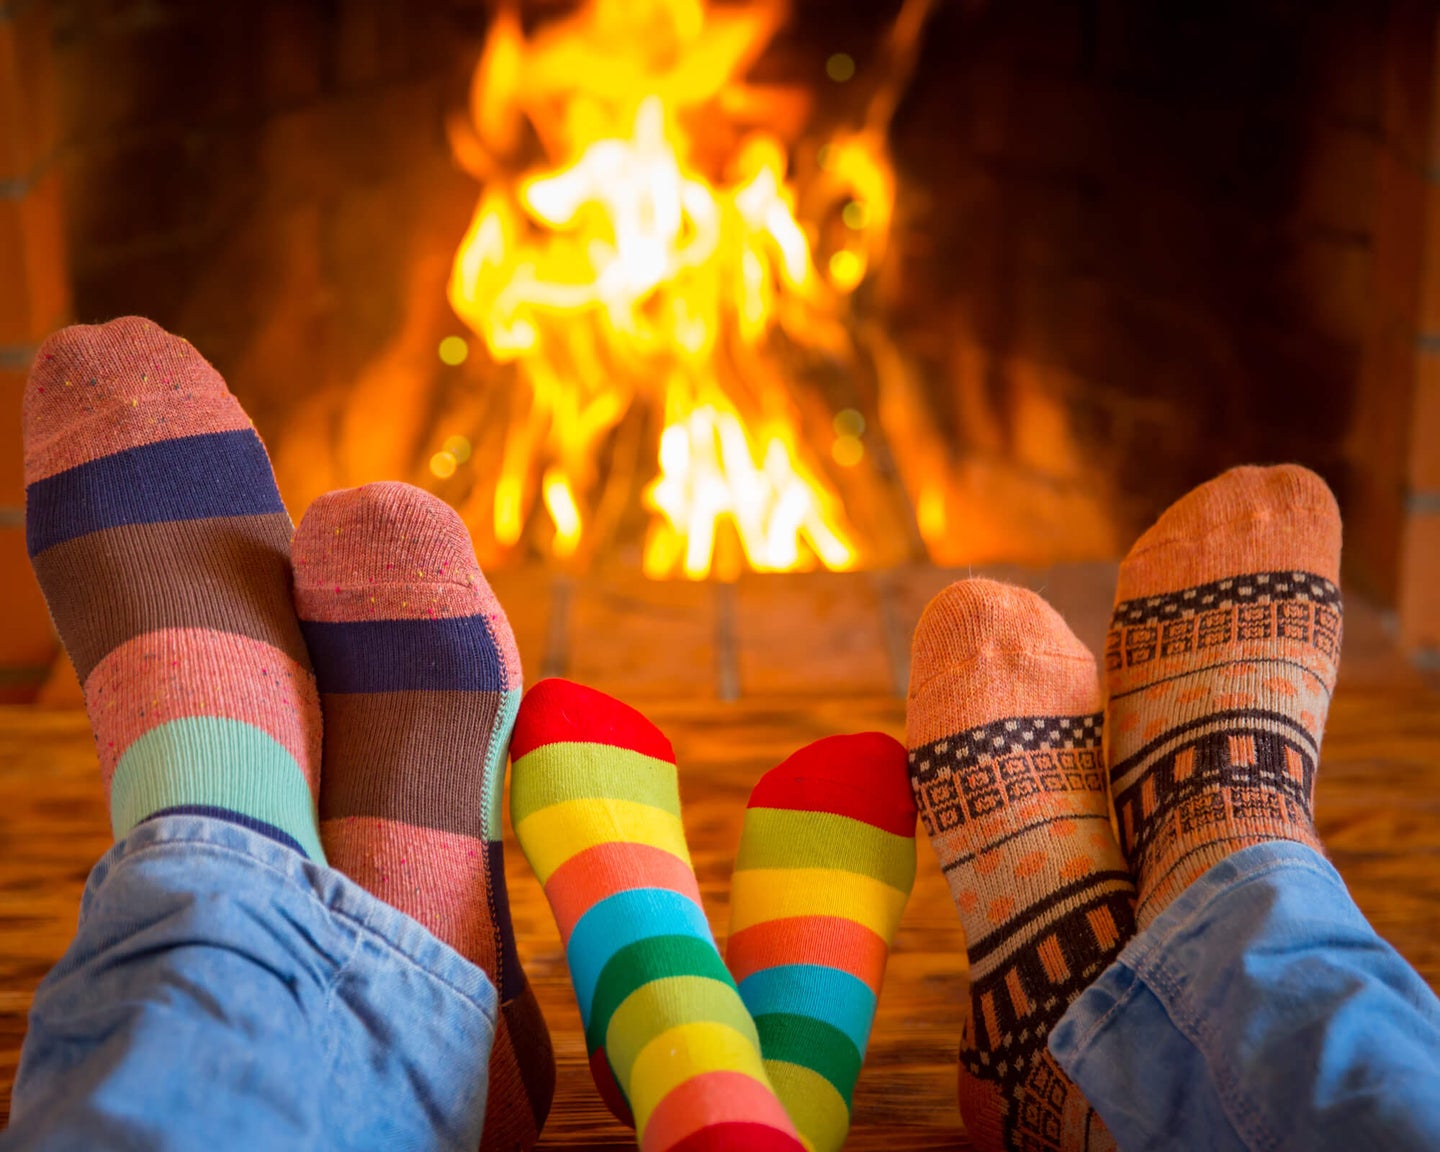 Best Socks: Keep Your Feet Warm and Comfortable All-Day Long